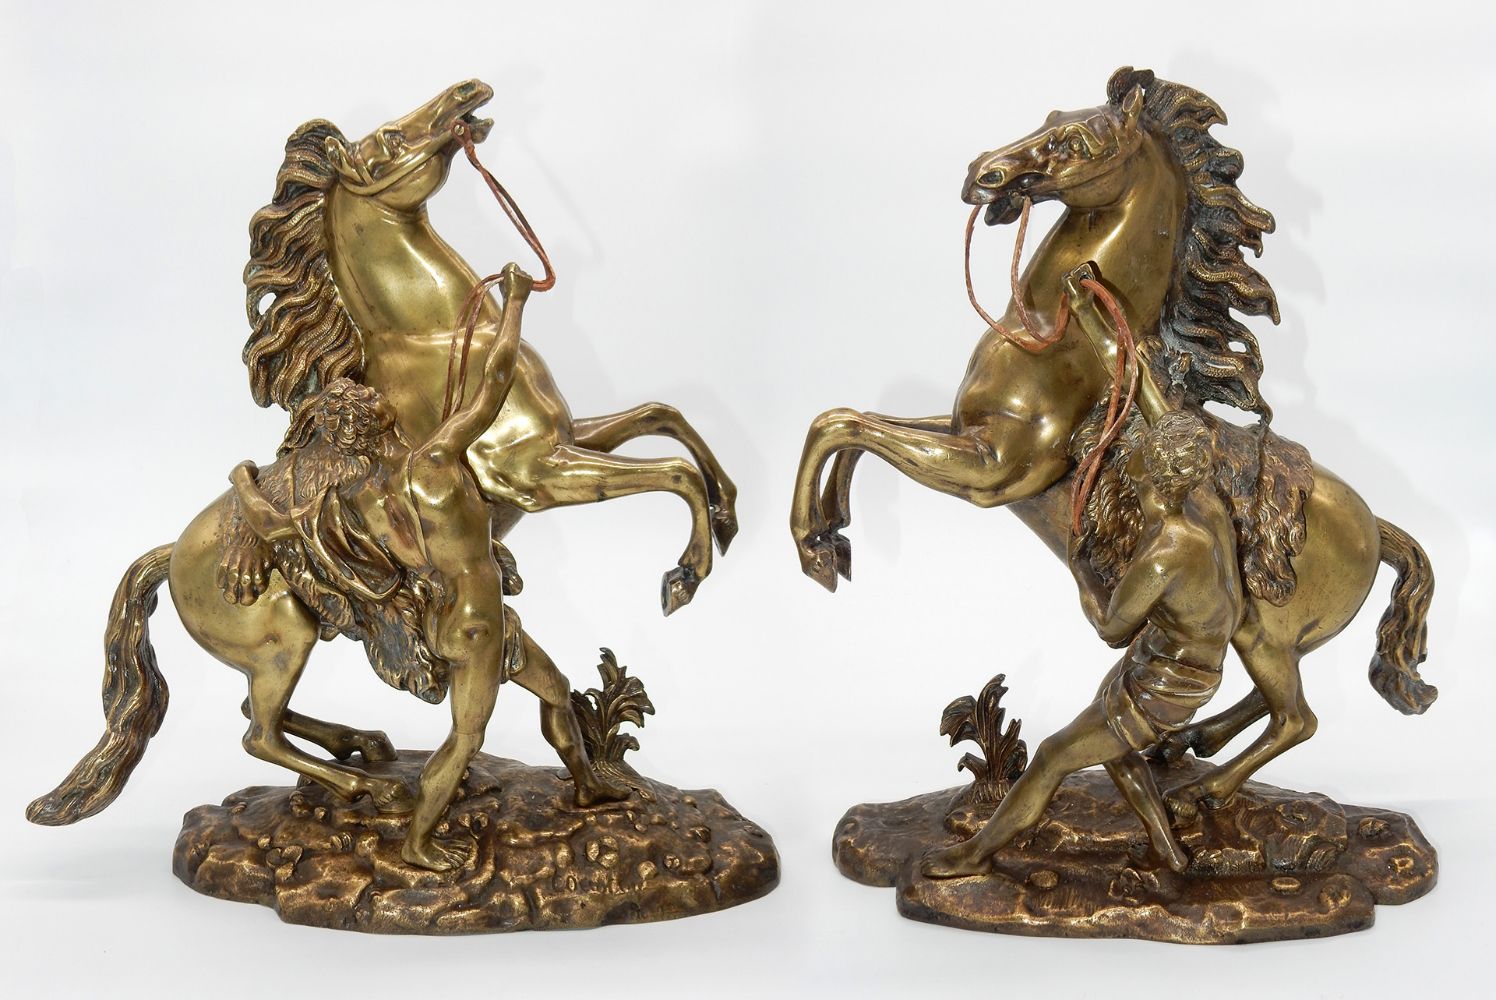 Special Early January Auction of Miscellaneous Objets d'Art, Collectables, Porcelain, Glass, Antique & Country Furniture